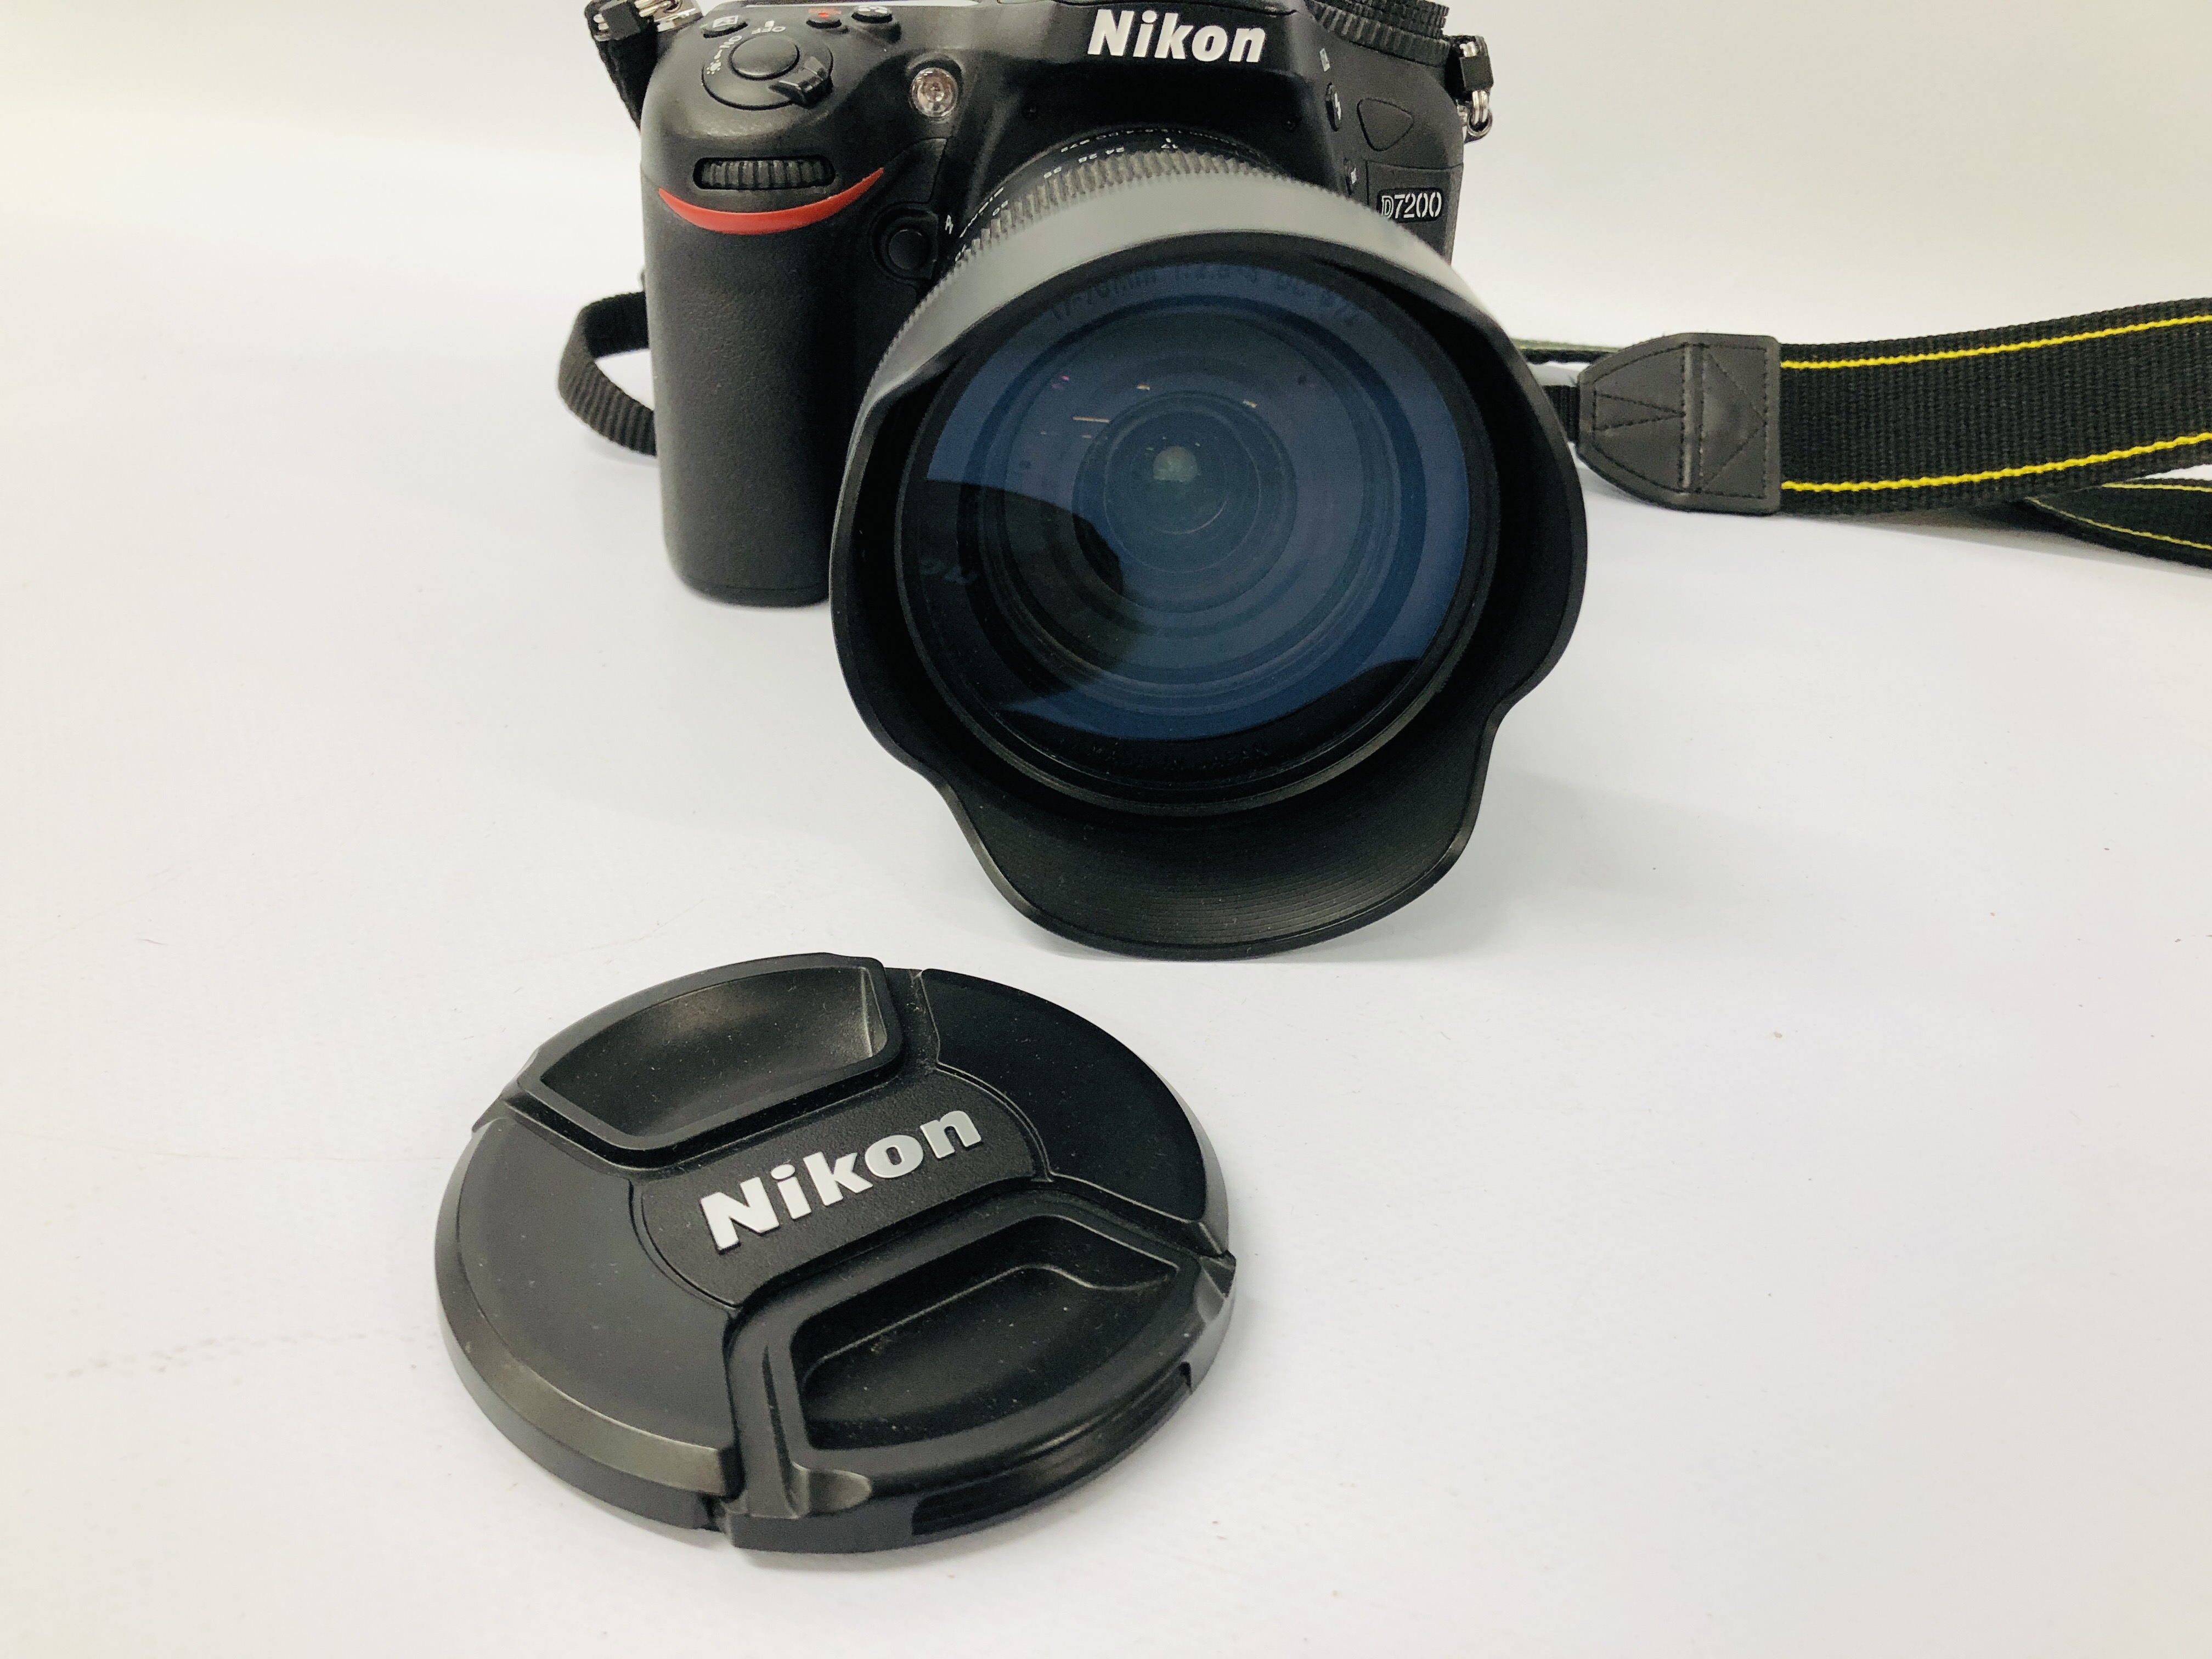 NIKON D7200 DIGITAL SLR CAMERA BODY FITTED WITH SIGMA 17-70 MM LENS S/N 9443071 - SOLD AS SEEN. - Image 3 of 5